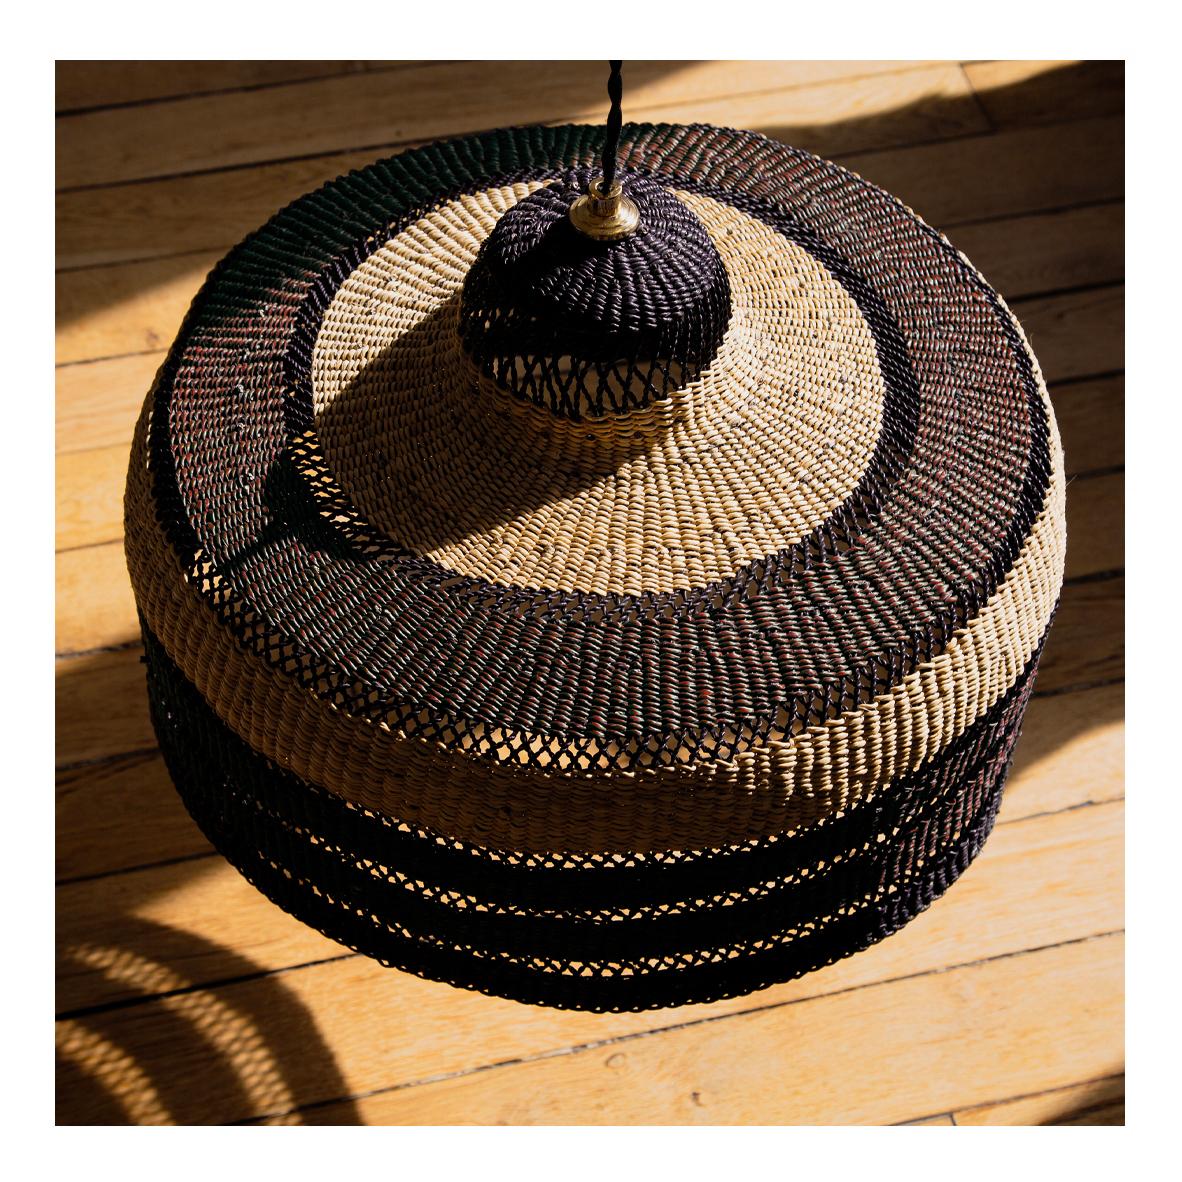 Hand-Woven Contemporary Ethnic Large Pendant Lamp Handwoven Straw Black Earth